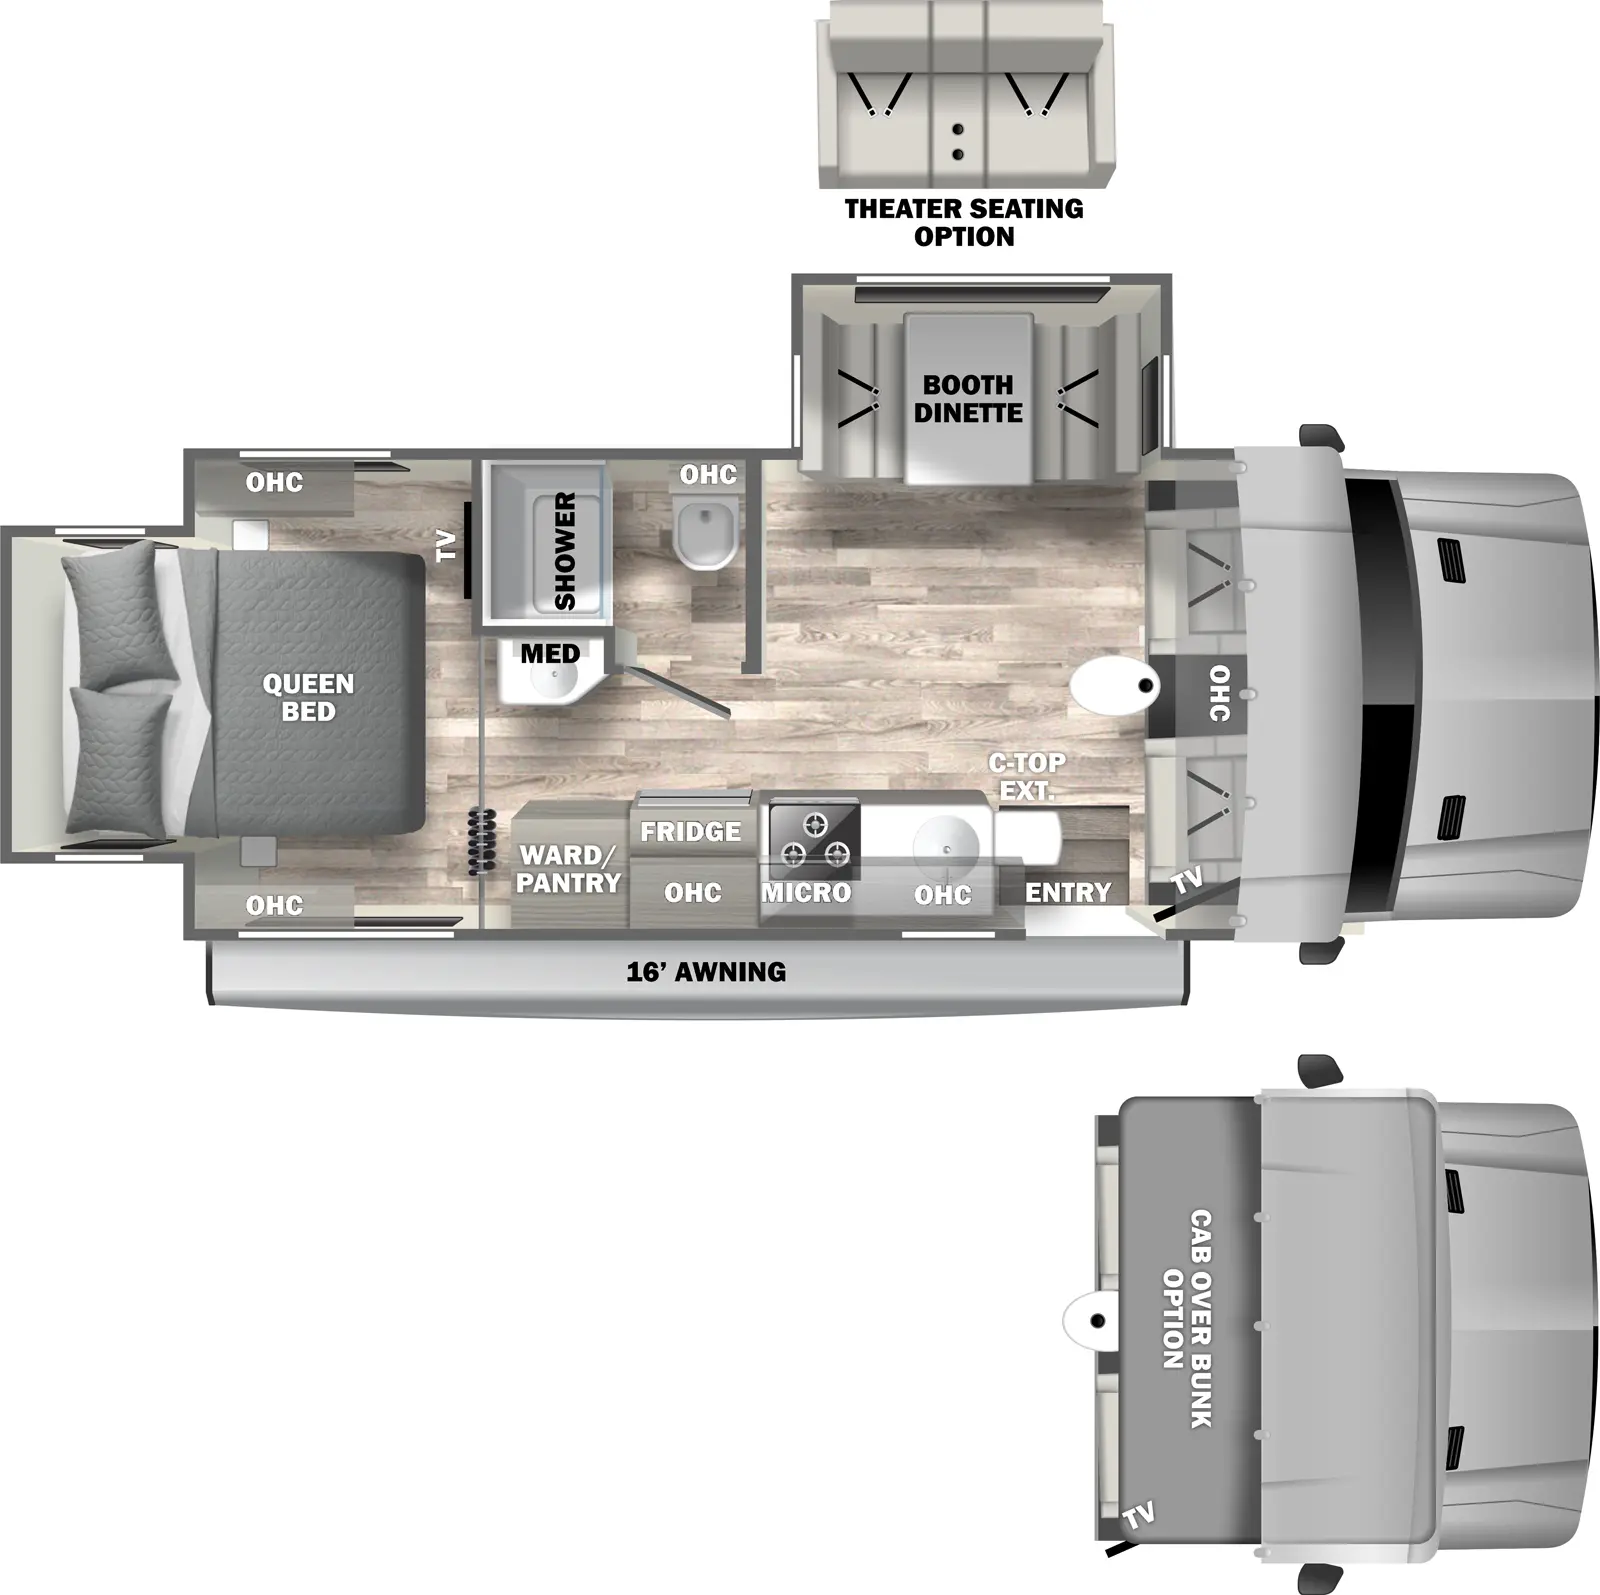 The 24RW has two slideouts and one entry. Exterior features a 16 foot awning. Interior layout front to back: cockpit overhead cabinet (optional cabover bunk), tv on door side, and table; off-door side booth dinette slideout (optional theater seating); door side entry, kitchen counter with extension, sink, overhead cabinet, cooktop, microwave, refrigerator, and wardrobe/pantry; off-door side bathroom with toilet, shower and overhead cabinet only, and sink and medicine cabinet outside the bathroom; rear bedroom with a rear queen bed slideout with a TV at the foot of the bed, and opposing overhead cabinets.